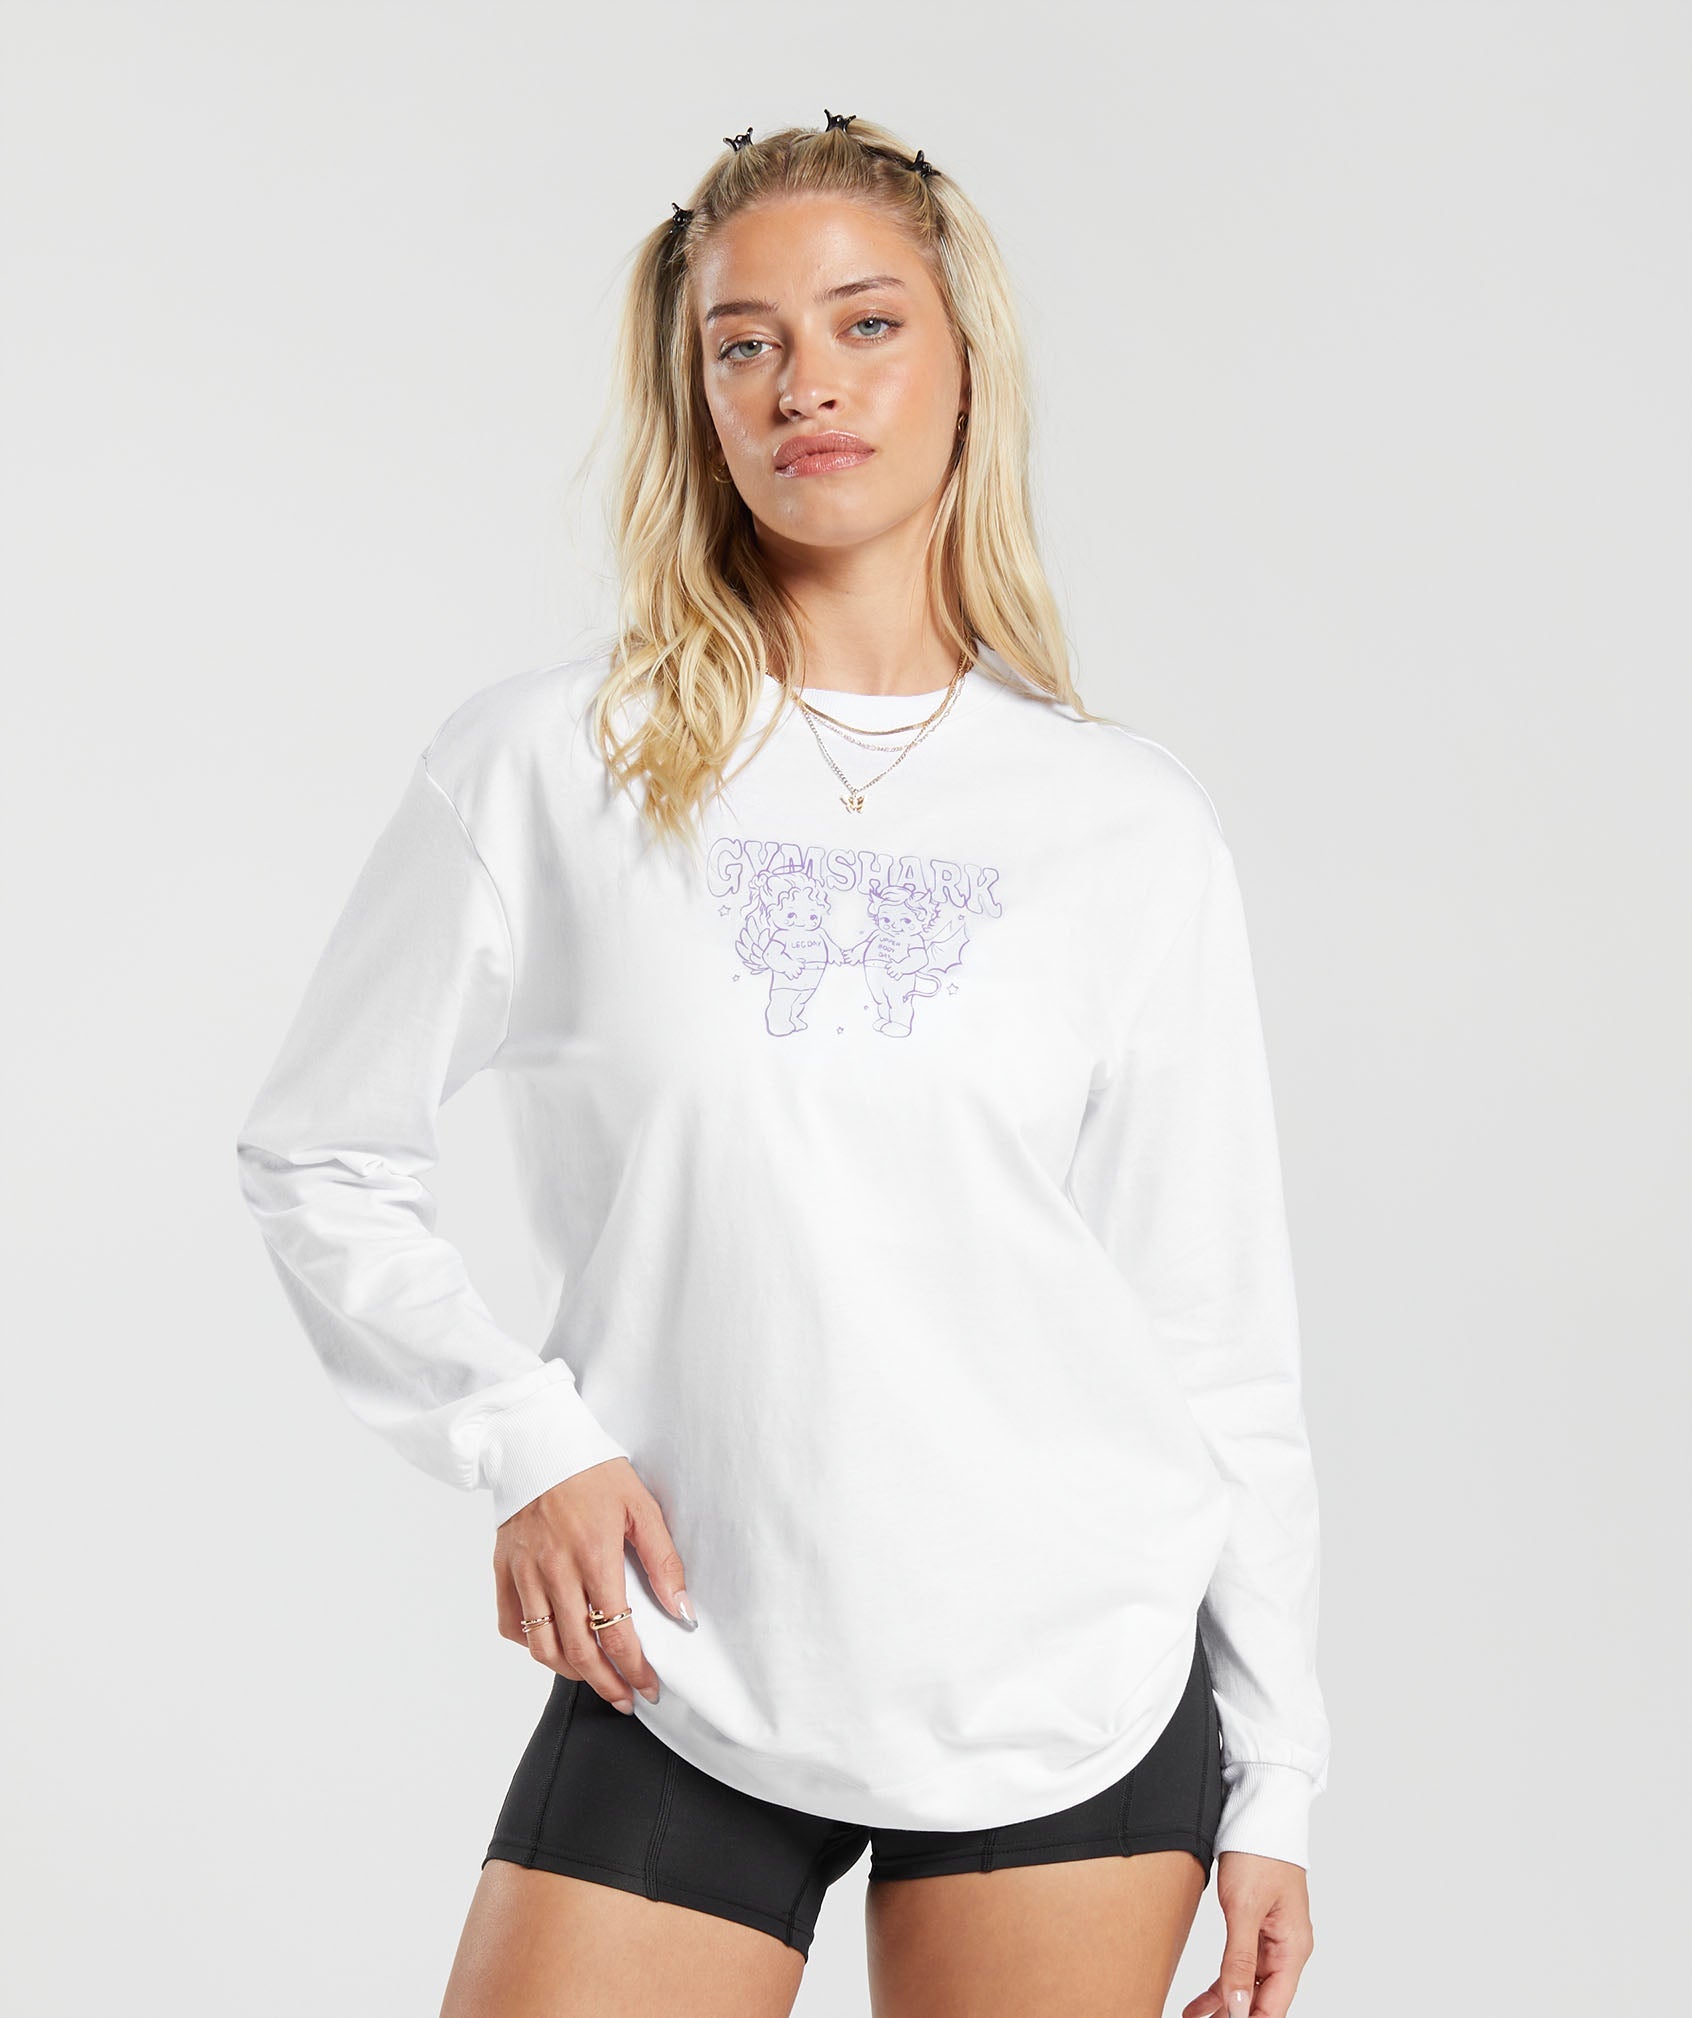 Cherub Graphic Long Sleeve Top in {{variantColor} is out of stock